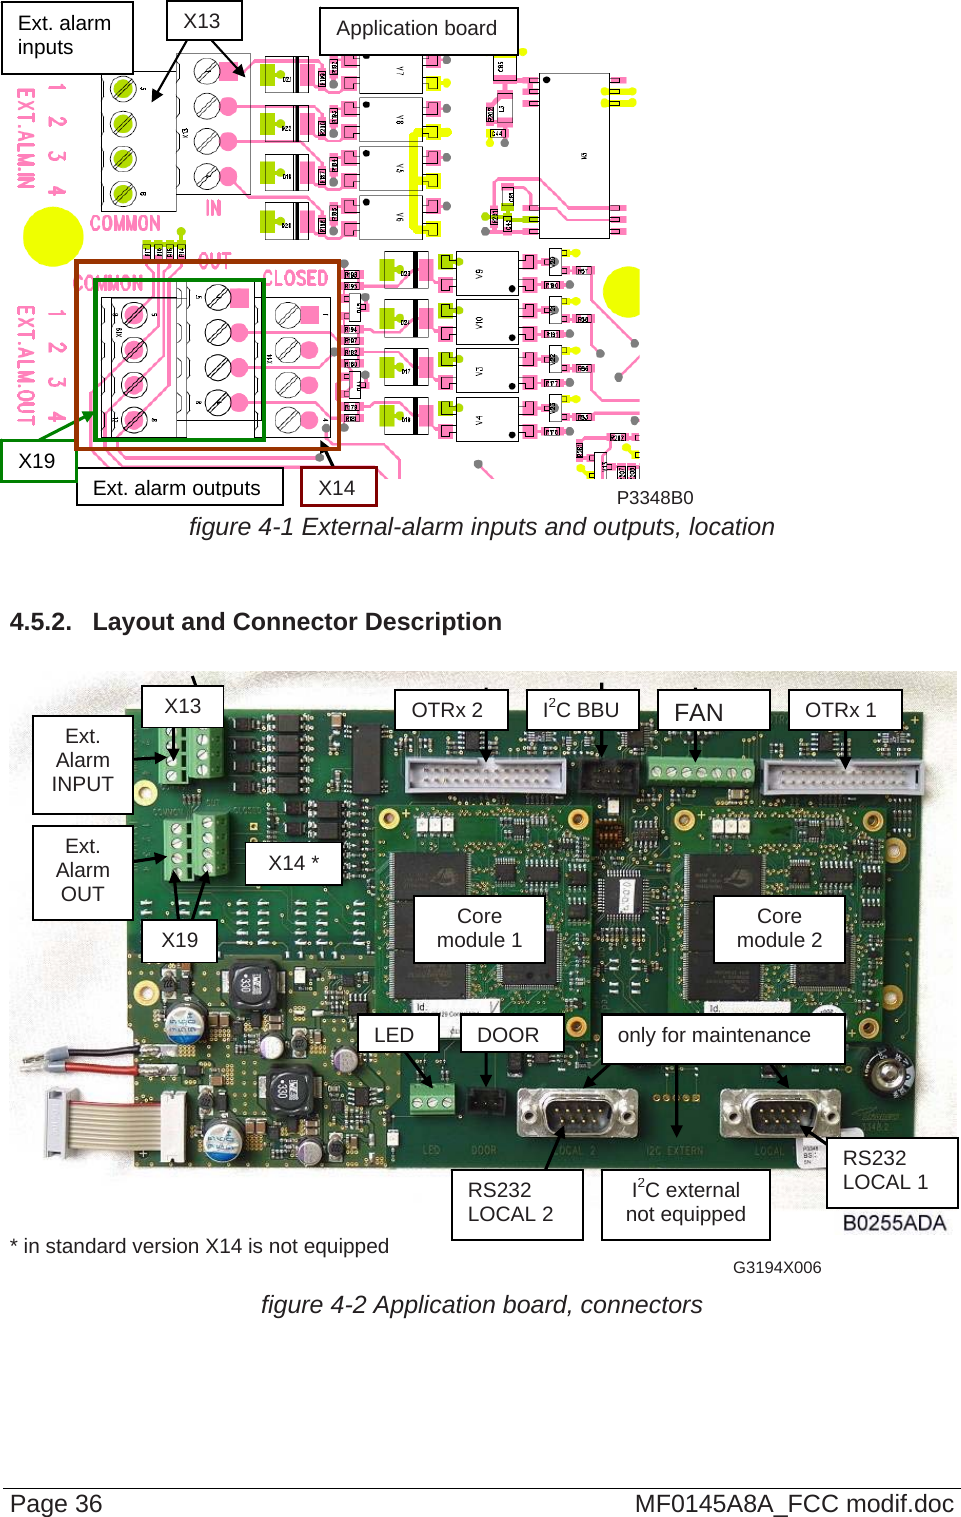  Page 36  MF0145A8A_FCC modif.doc      figure 4-1 External-alarm inputs and outputs, location   4.5.2.  Layout and Connector Description    * in standard version X14 is not equipped  G3194X006 figure 4-2 Application board, connectors  Ext. alarm  inputs  X13  Application board X19 Ext. alarm outputs  X14  P3348B0X13  I2C BBUFANOTRx 2 OTRx 1 Ext. Alarm INPUT Ext.  Alarm OUT X14 * Core module 1  Core module 2 X19 LED DOOR only for maintenance RS232 LOCAL 1 I2C external not equipped RS232 LOCAL 2 